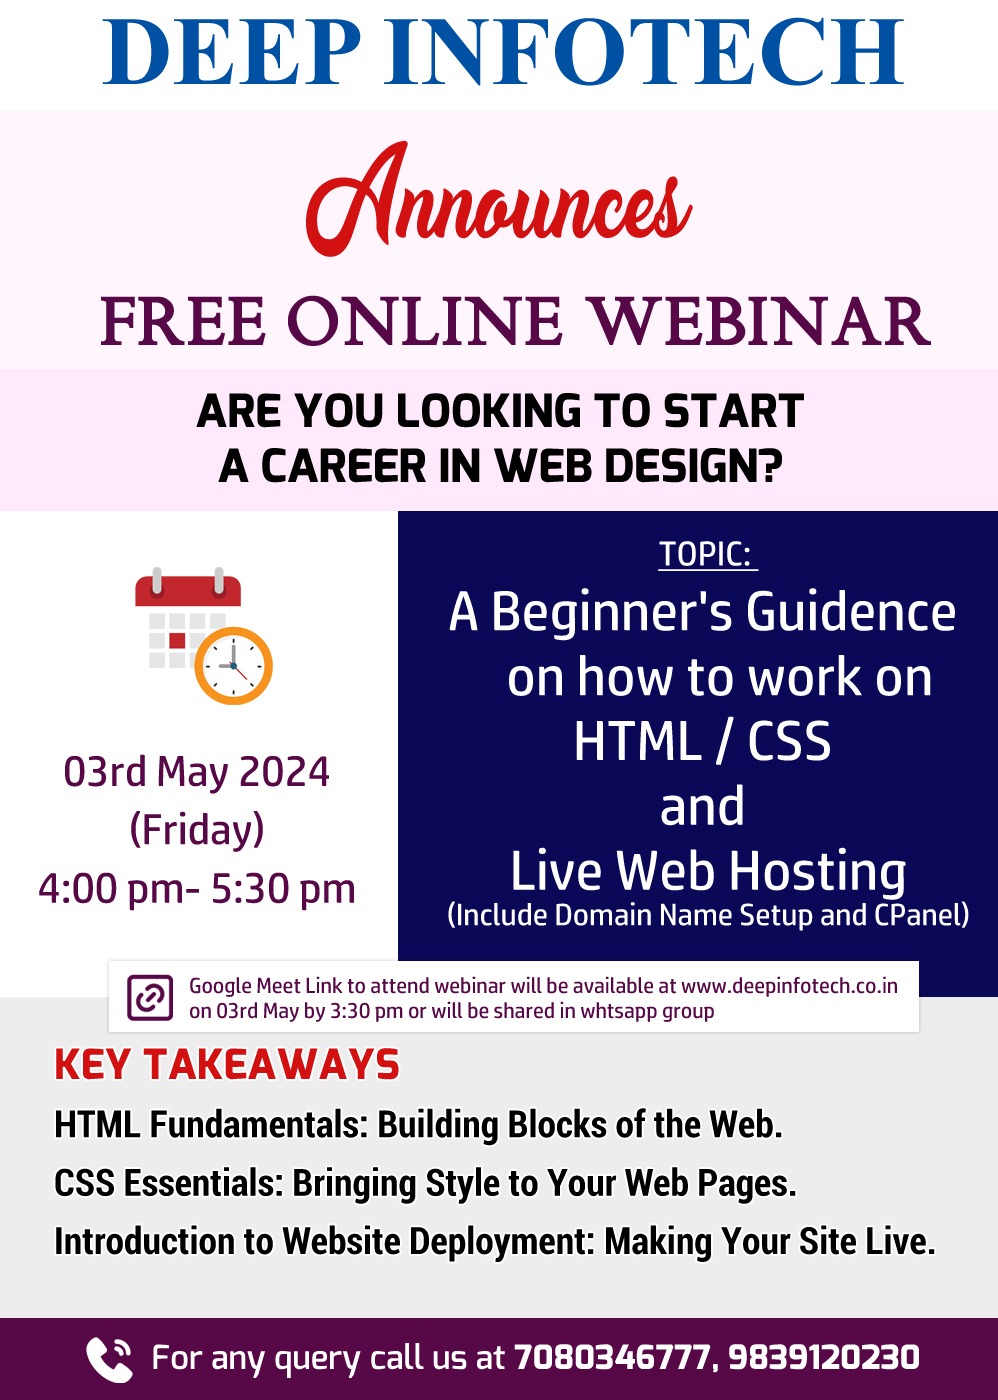 Deep Infotech Free Online Webinar Registration How to work on HTML / CSS and Live Web Hosting